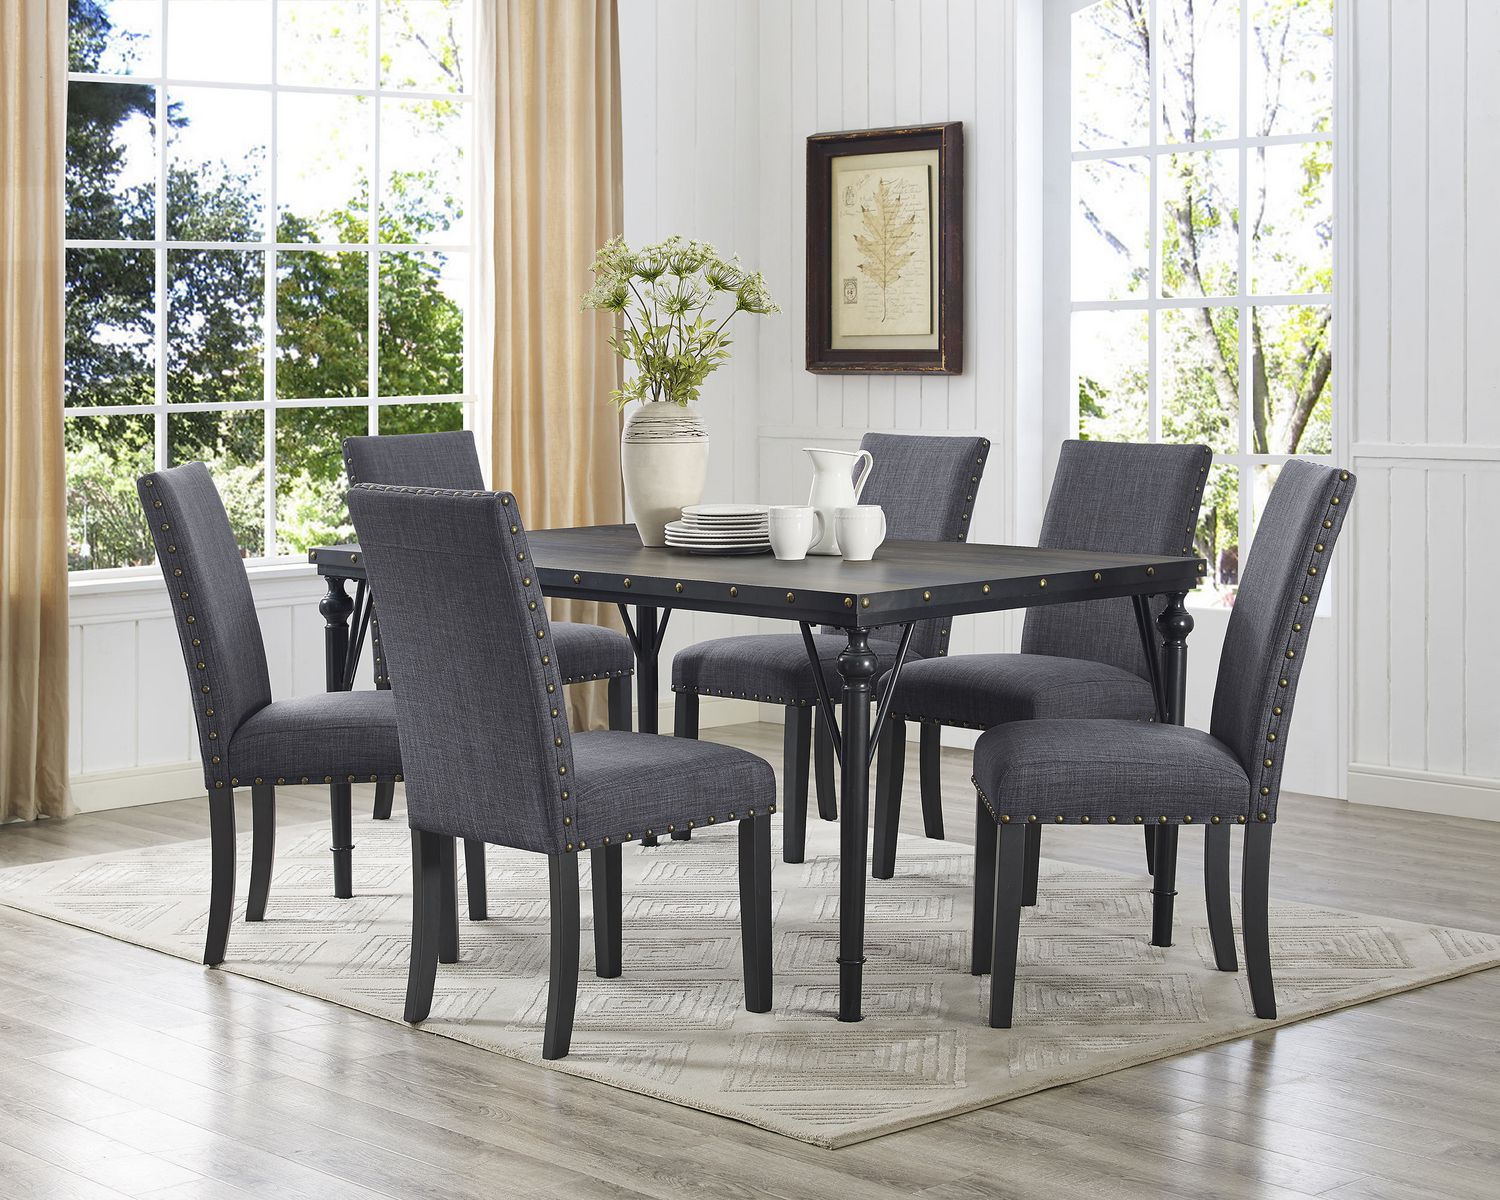 Brassex Inc Arianna 7-Piece Dining Set, Table + 6 Chairs, Grey